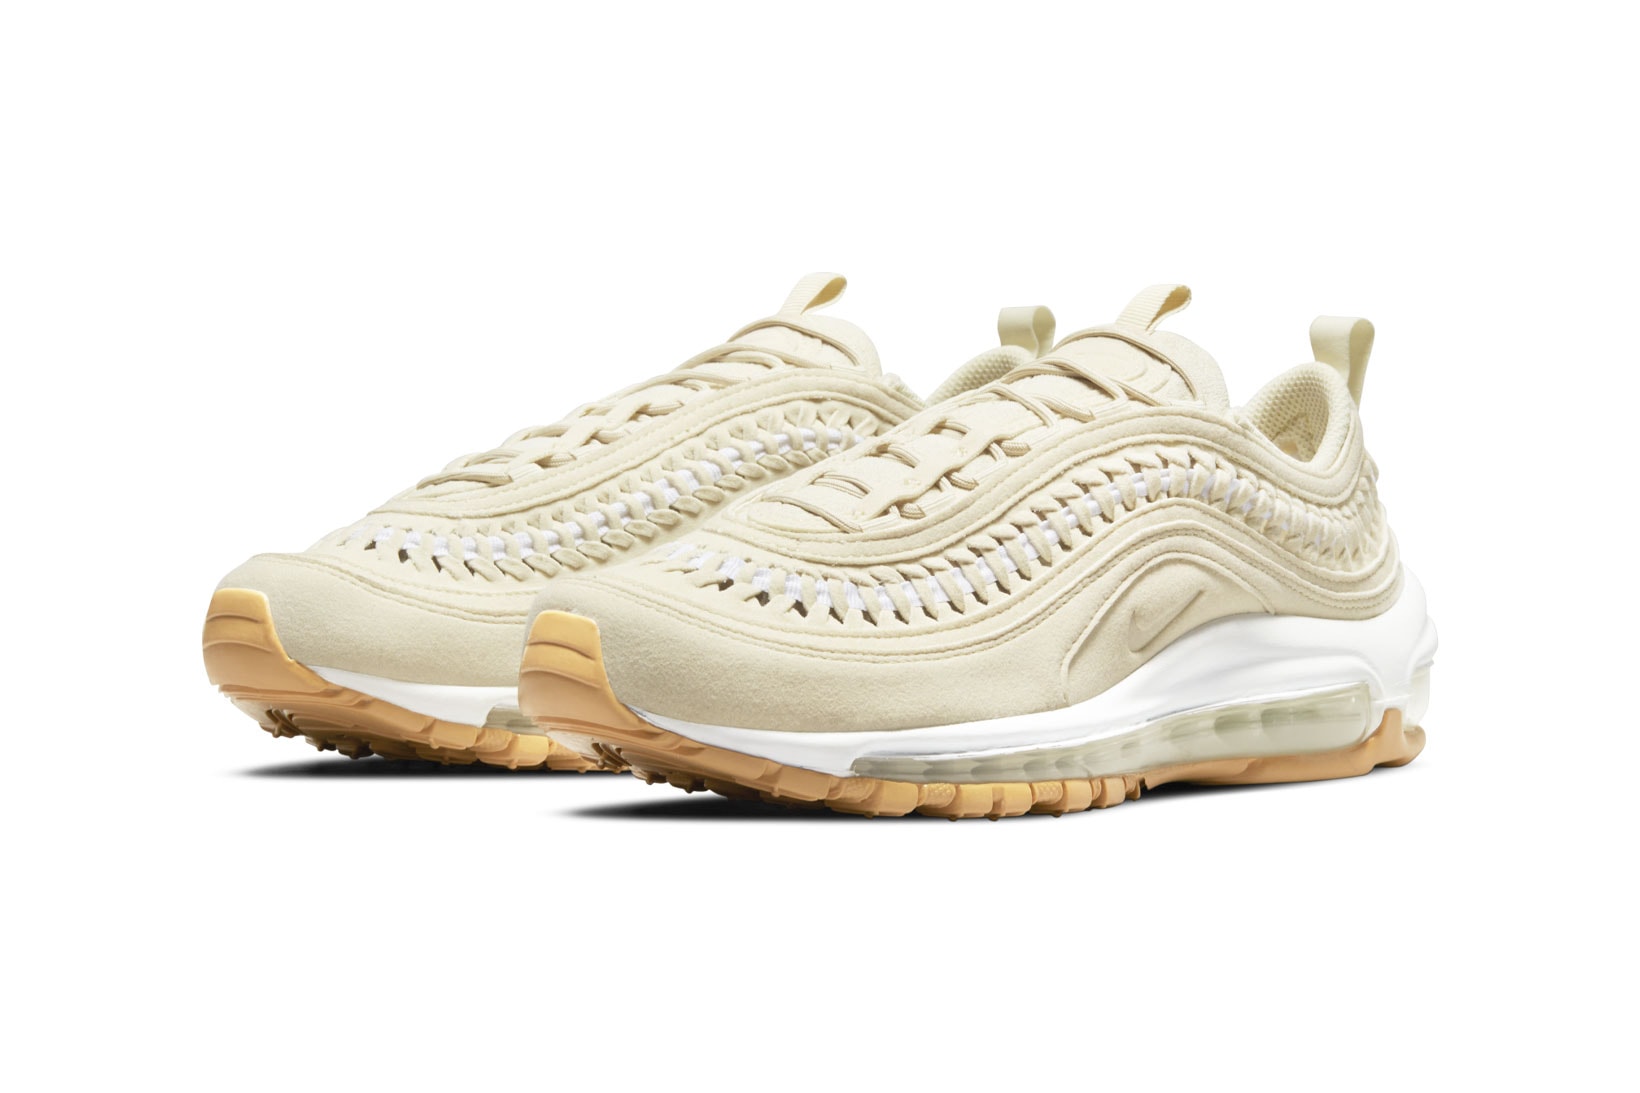 Nike Air Max 97 AM97 LX Woven Sneakers Upper Shoelaces Toe